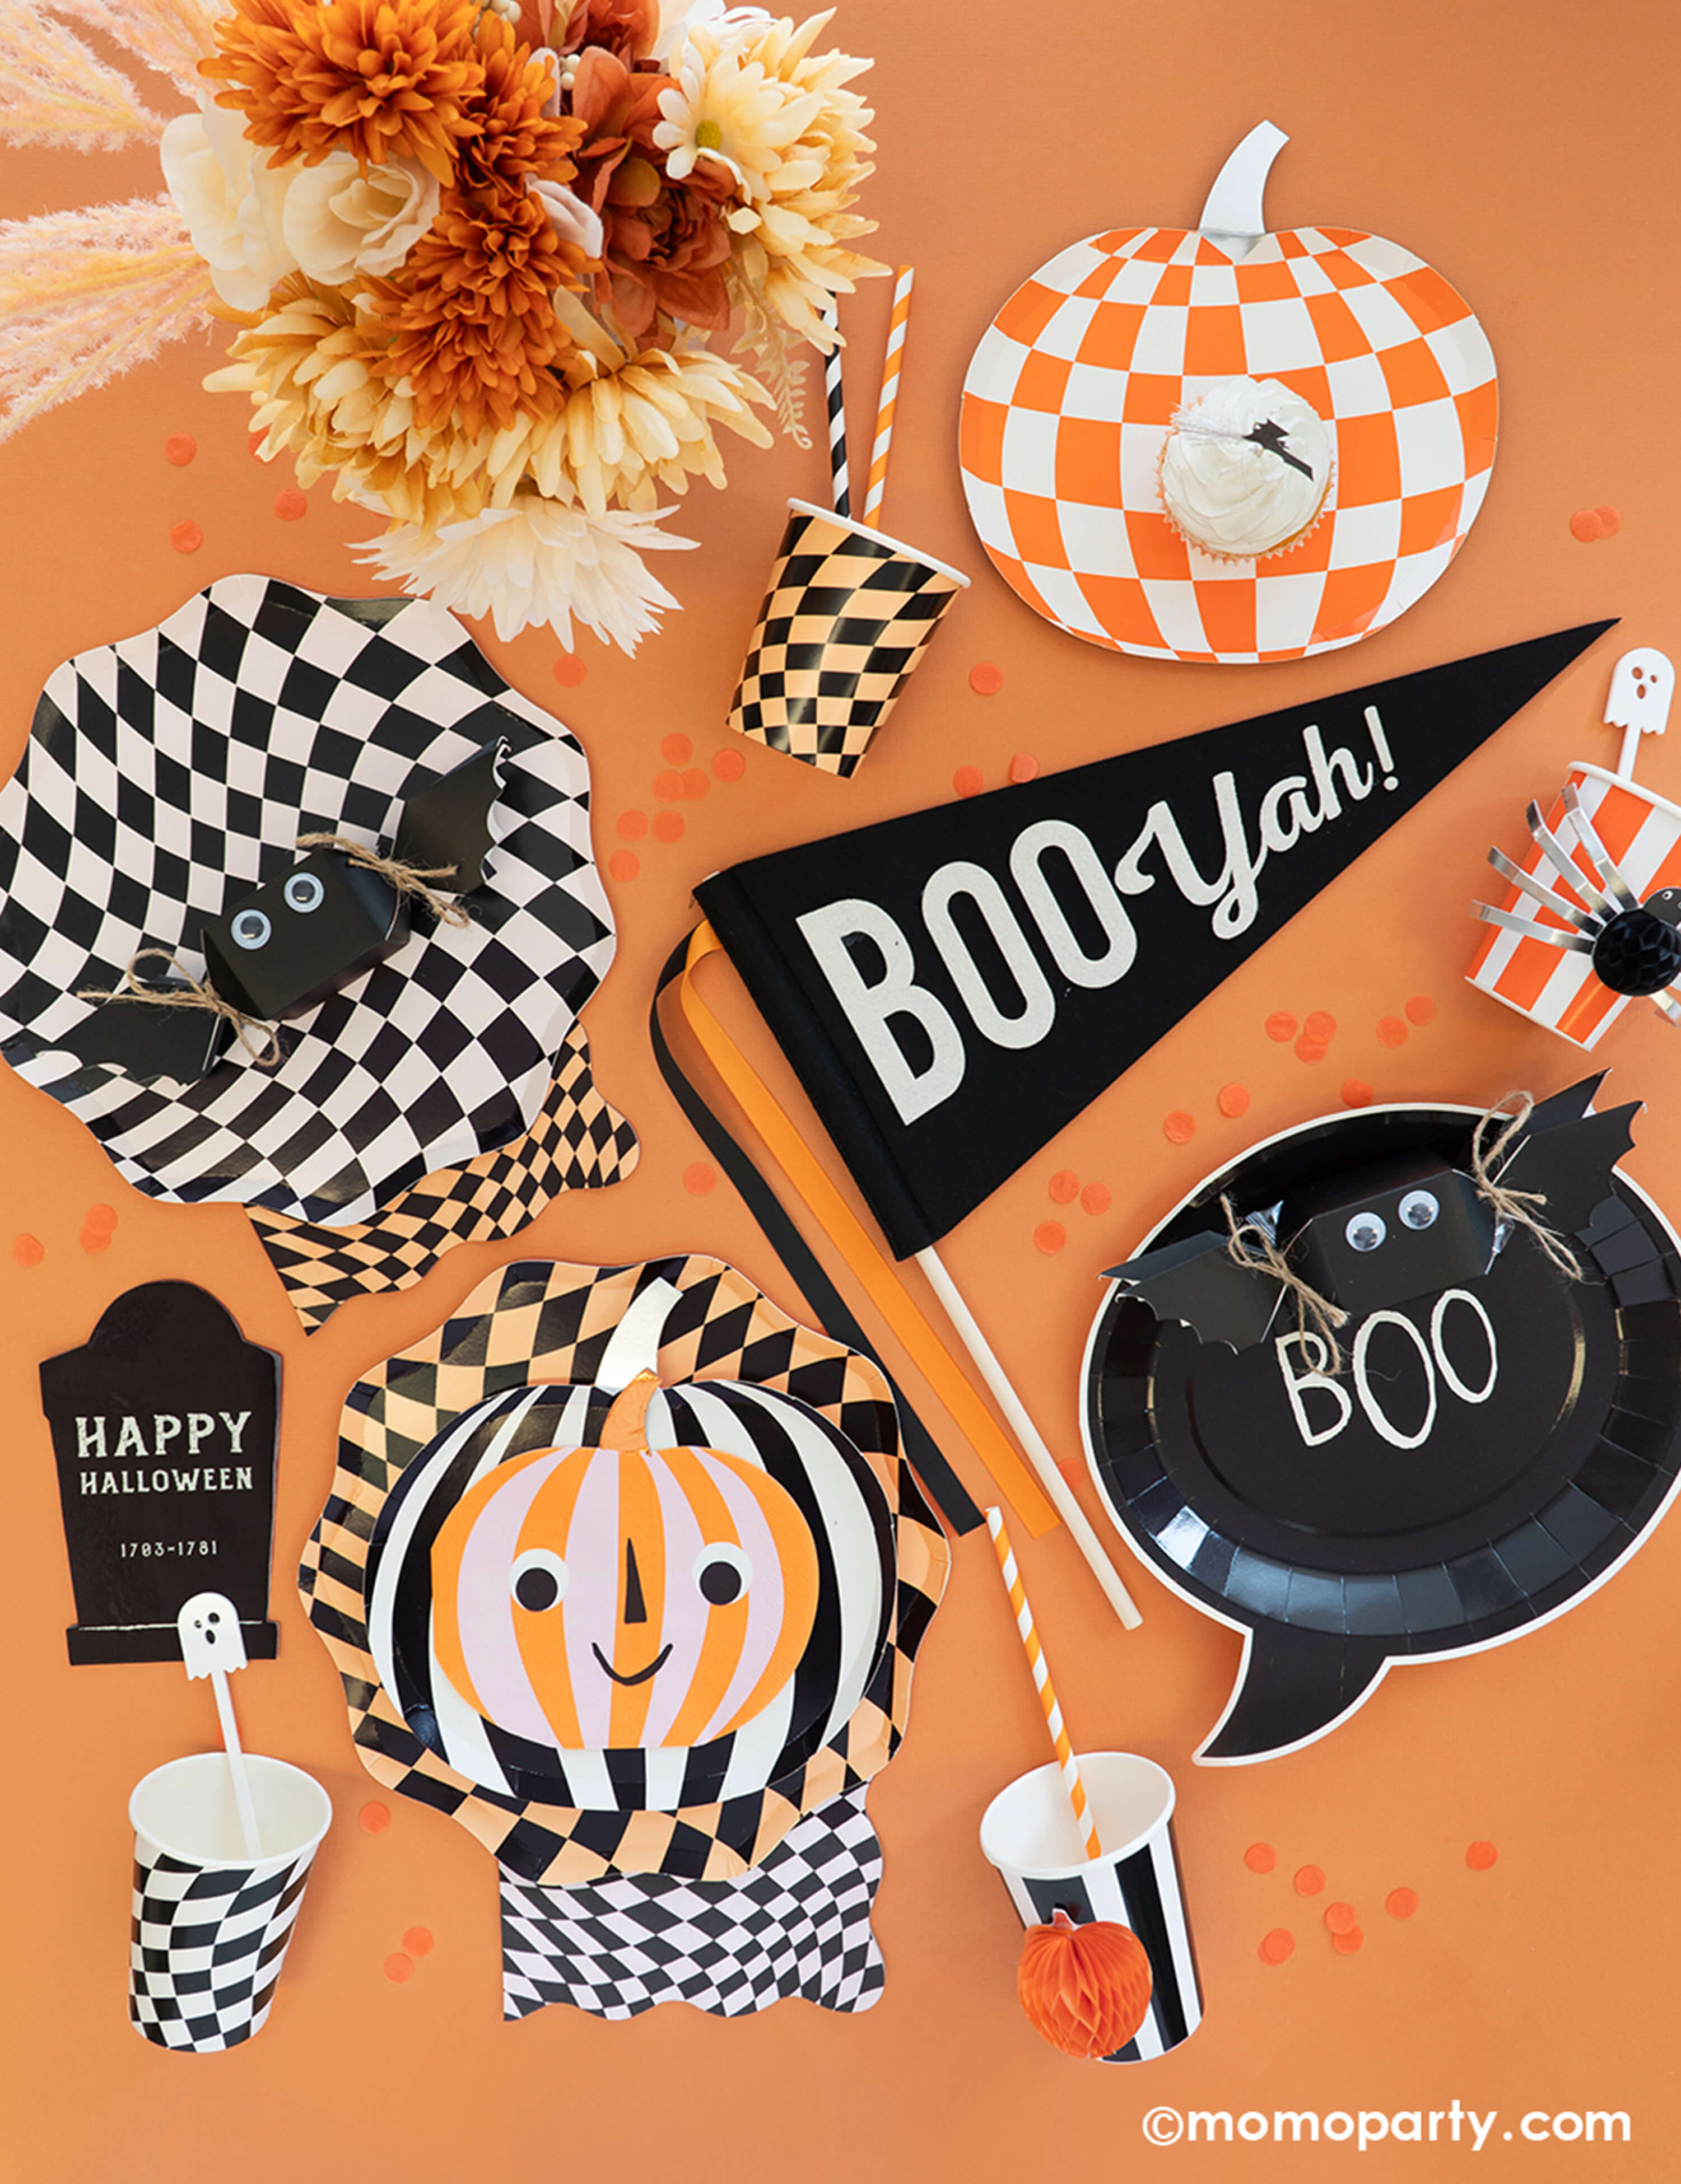 A table filled with Momo Party Classic Orange and Black Halloween Party Decorations including swirling checkered plates, cups, napkins, orange and striped pumpkin shaped plates with googly eyes, black Happy Halloween tombstone shaped napkins, Boo Yah party pennant, bat shaped jelly beans, and boo shaped plates, all makes a spooky yet fun decoration ideas for a Halloween bash this season.